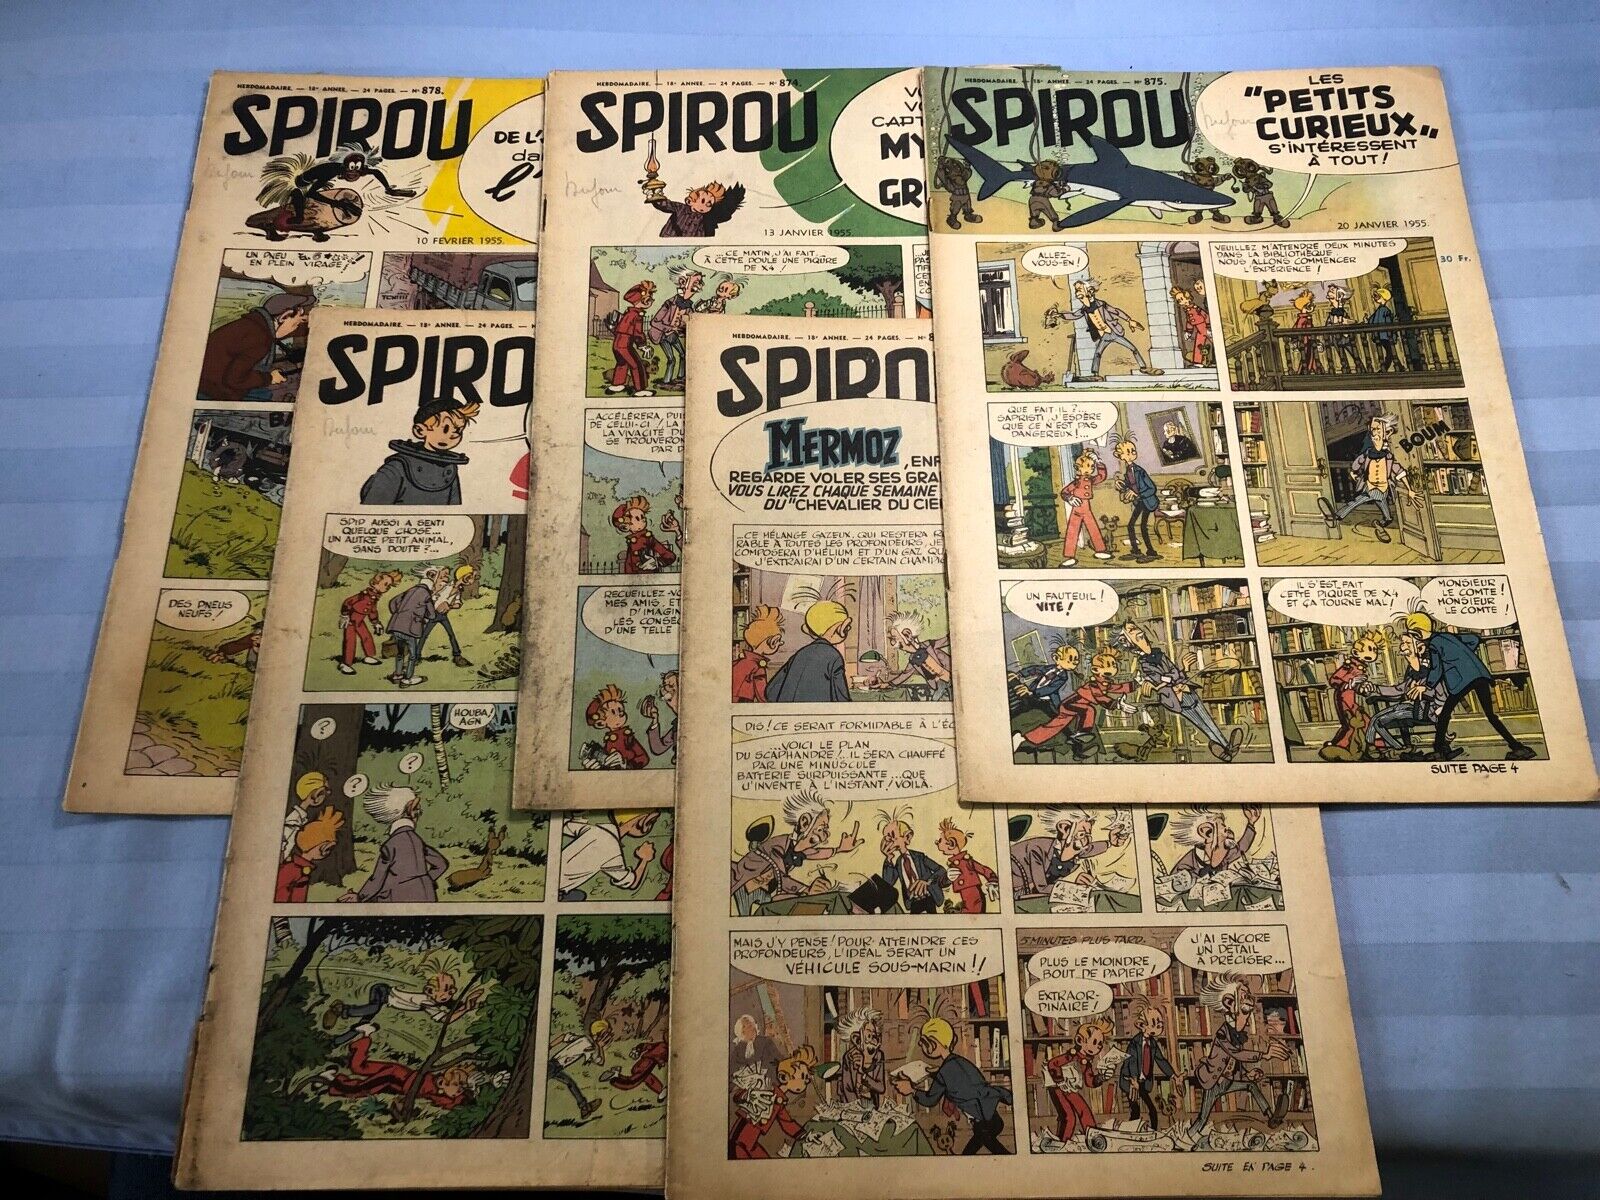 Spirou 1955 Weekly French Editions, set of 5, used 874 875 876 877 878